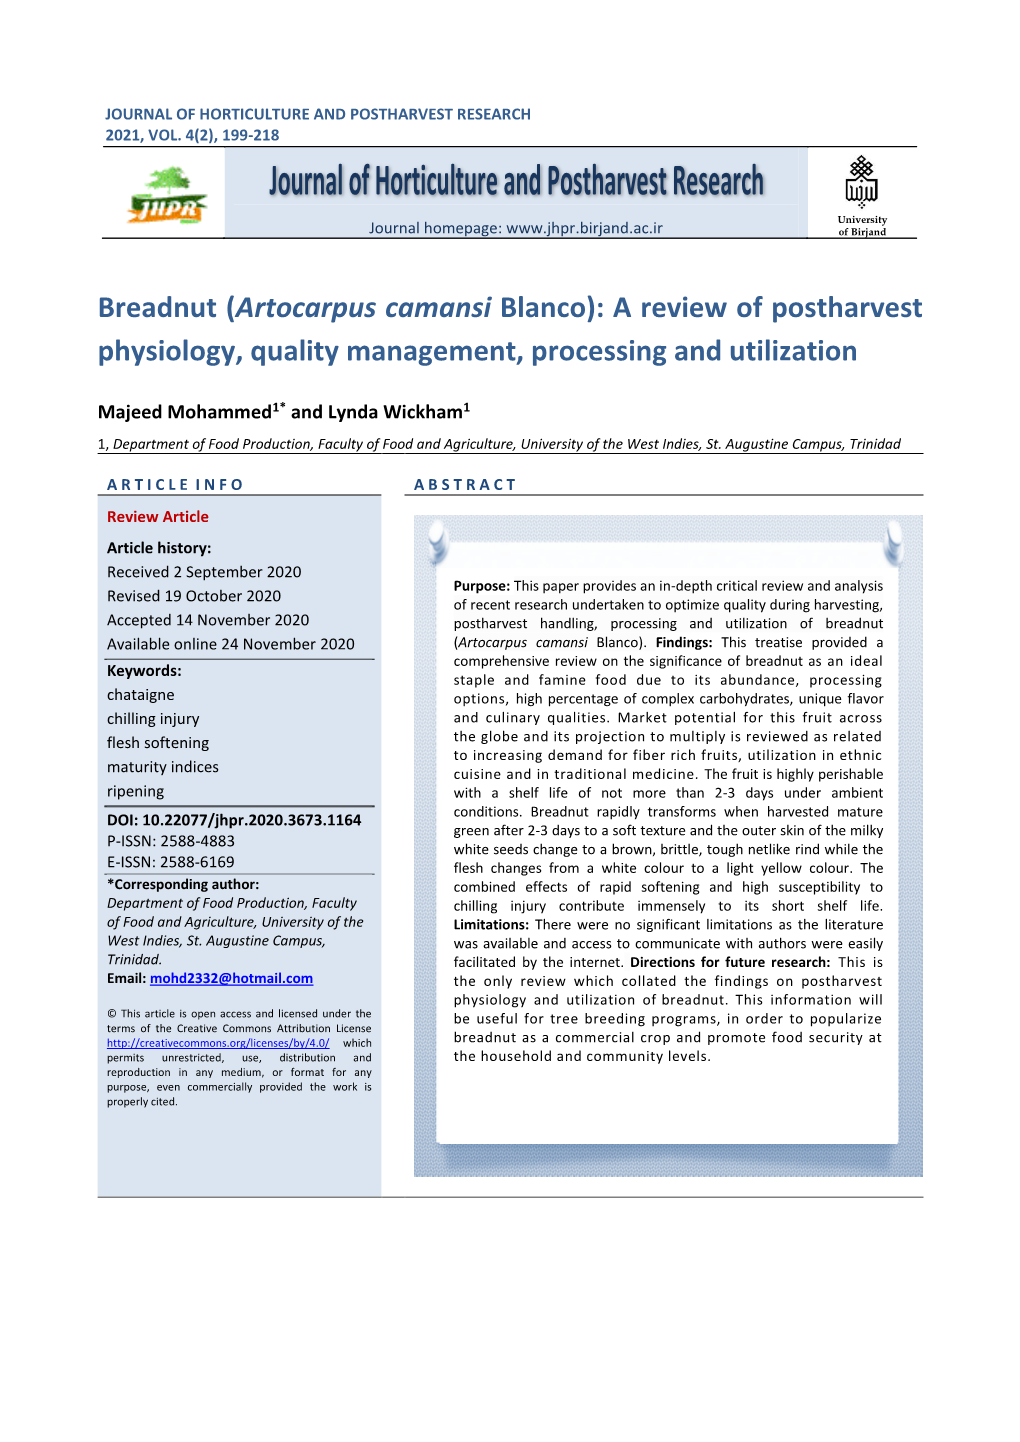 Breadnut (Artocarpus Camansi Blanco): a Review of Postharvest Physiology, Quality Management, Processing and Utilization